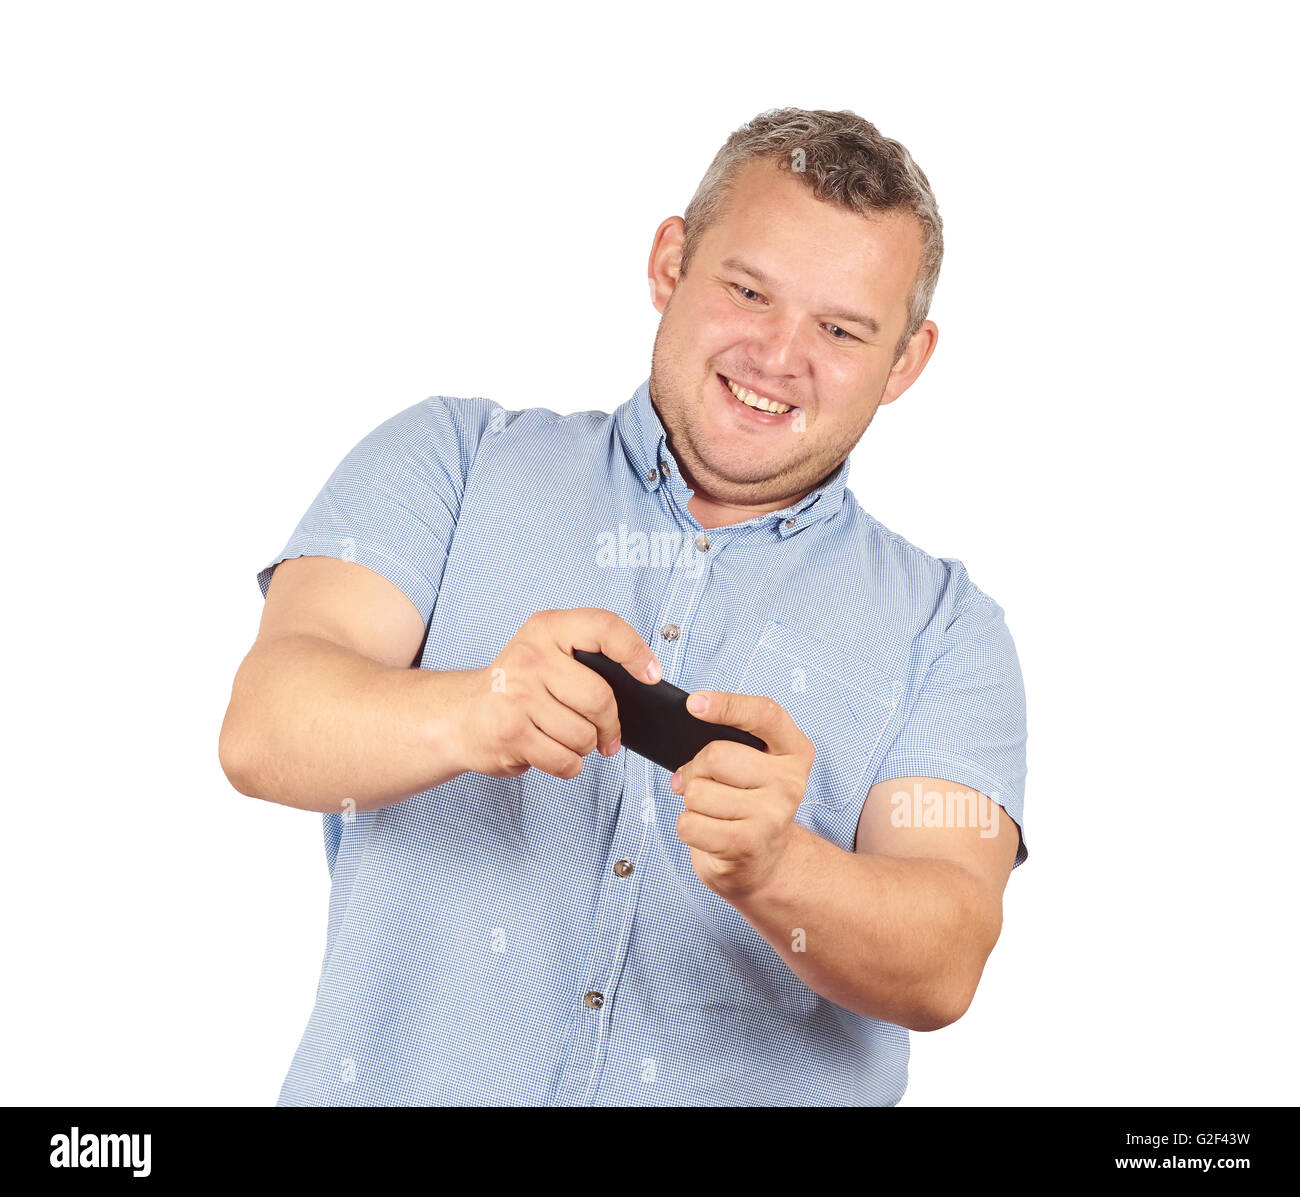 fat man looks at the phone. Playing on a smartphone. Bad news. Emotions.  Isolated on white background. Stock Photo